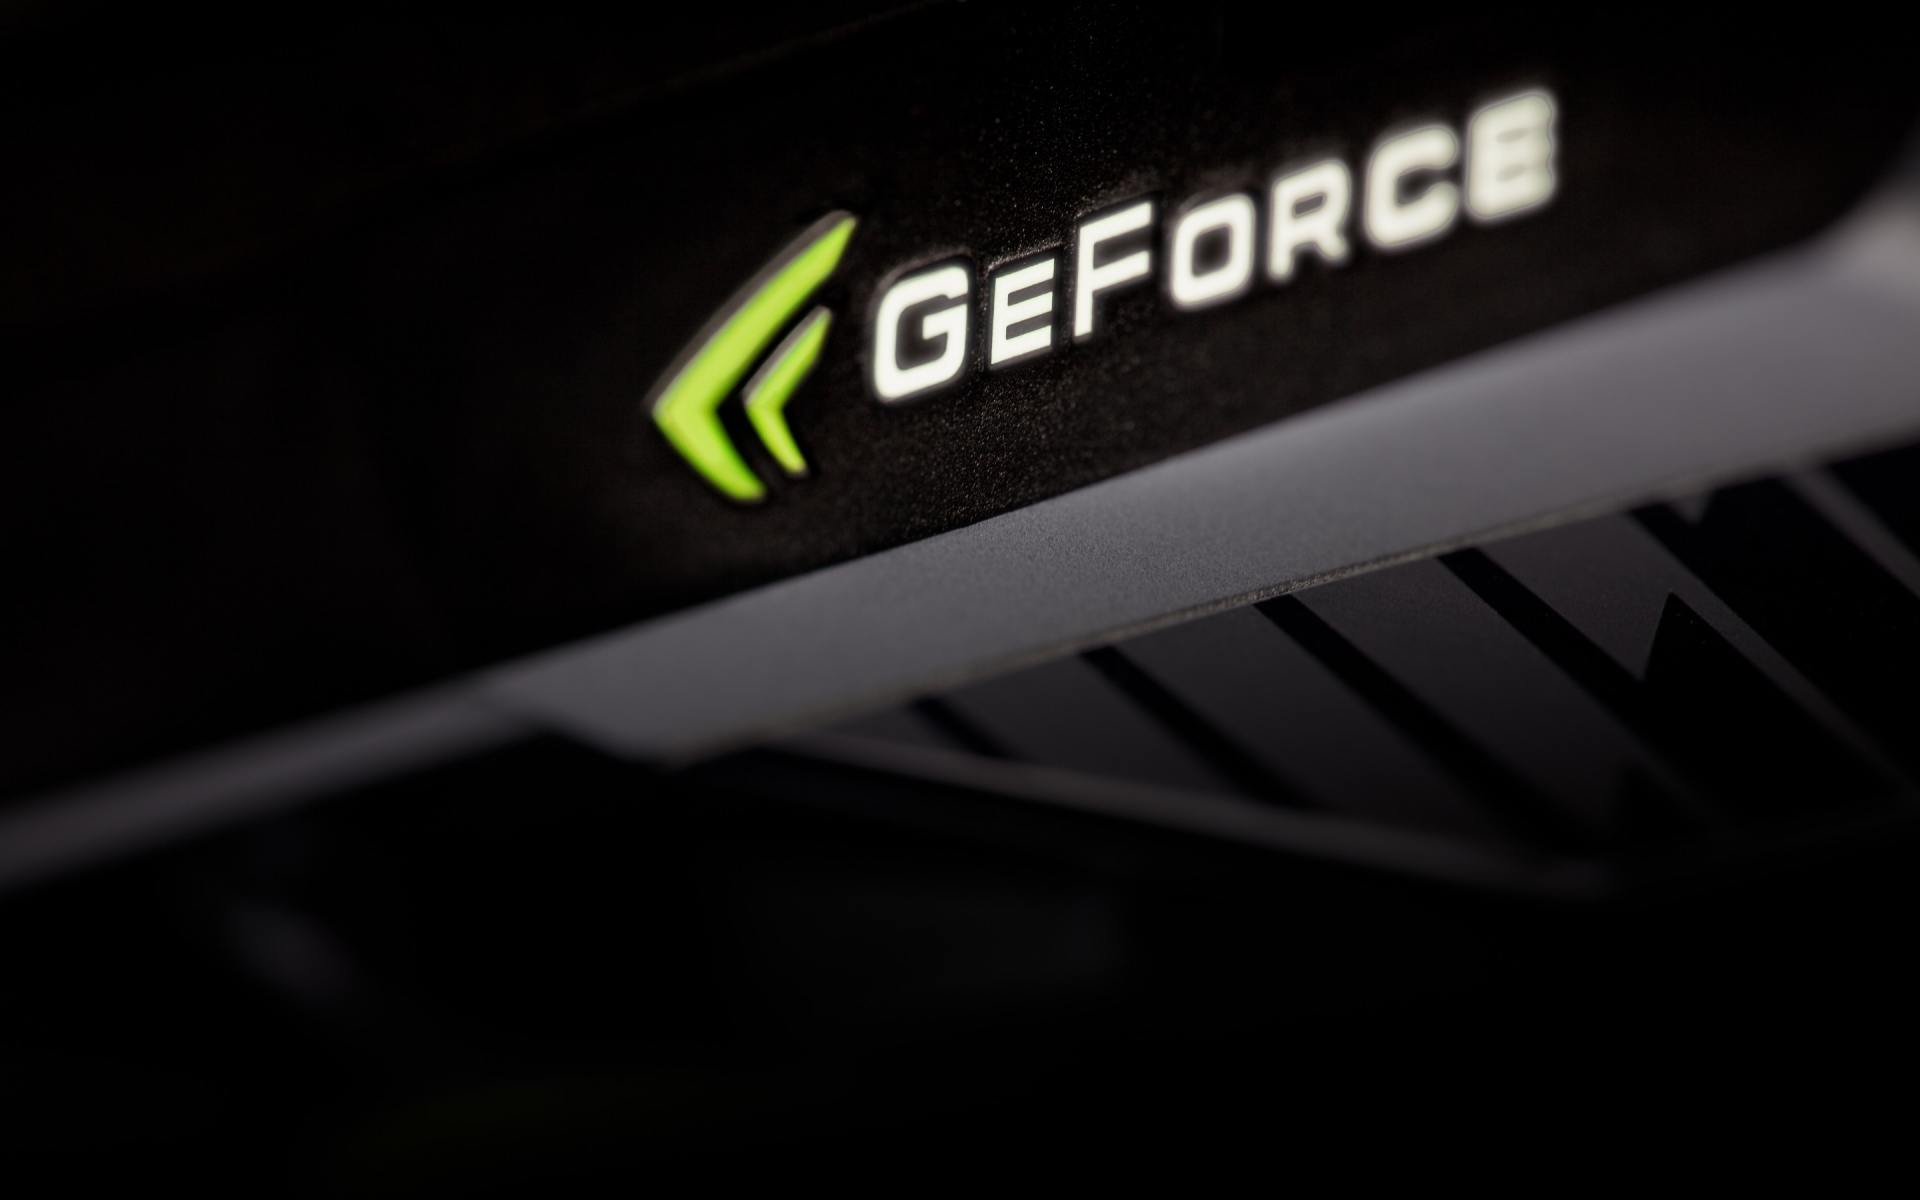 GeForce Graphics for 1920 x 1200 widescreen resolution